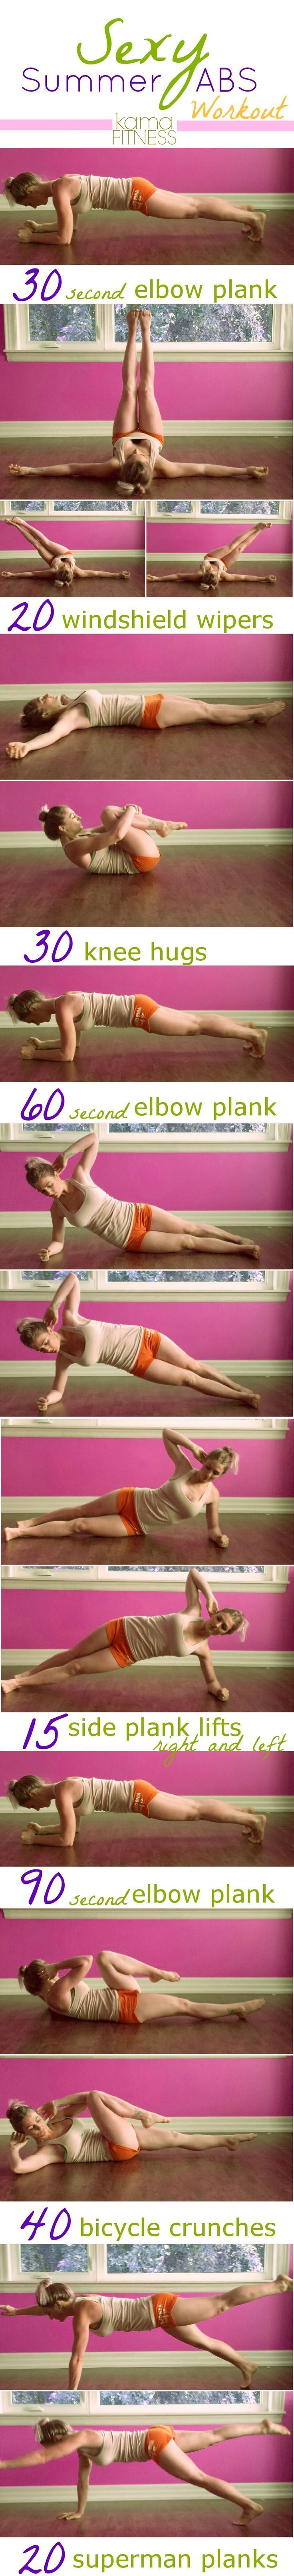 Sexy Abs Workout Planks, si